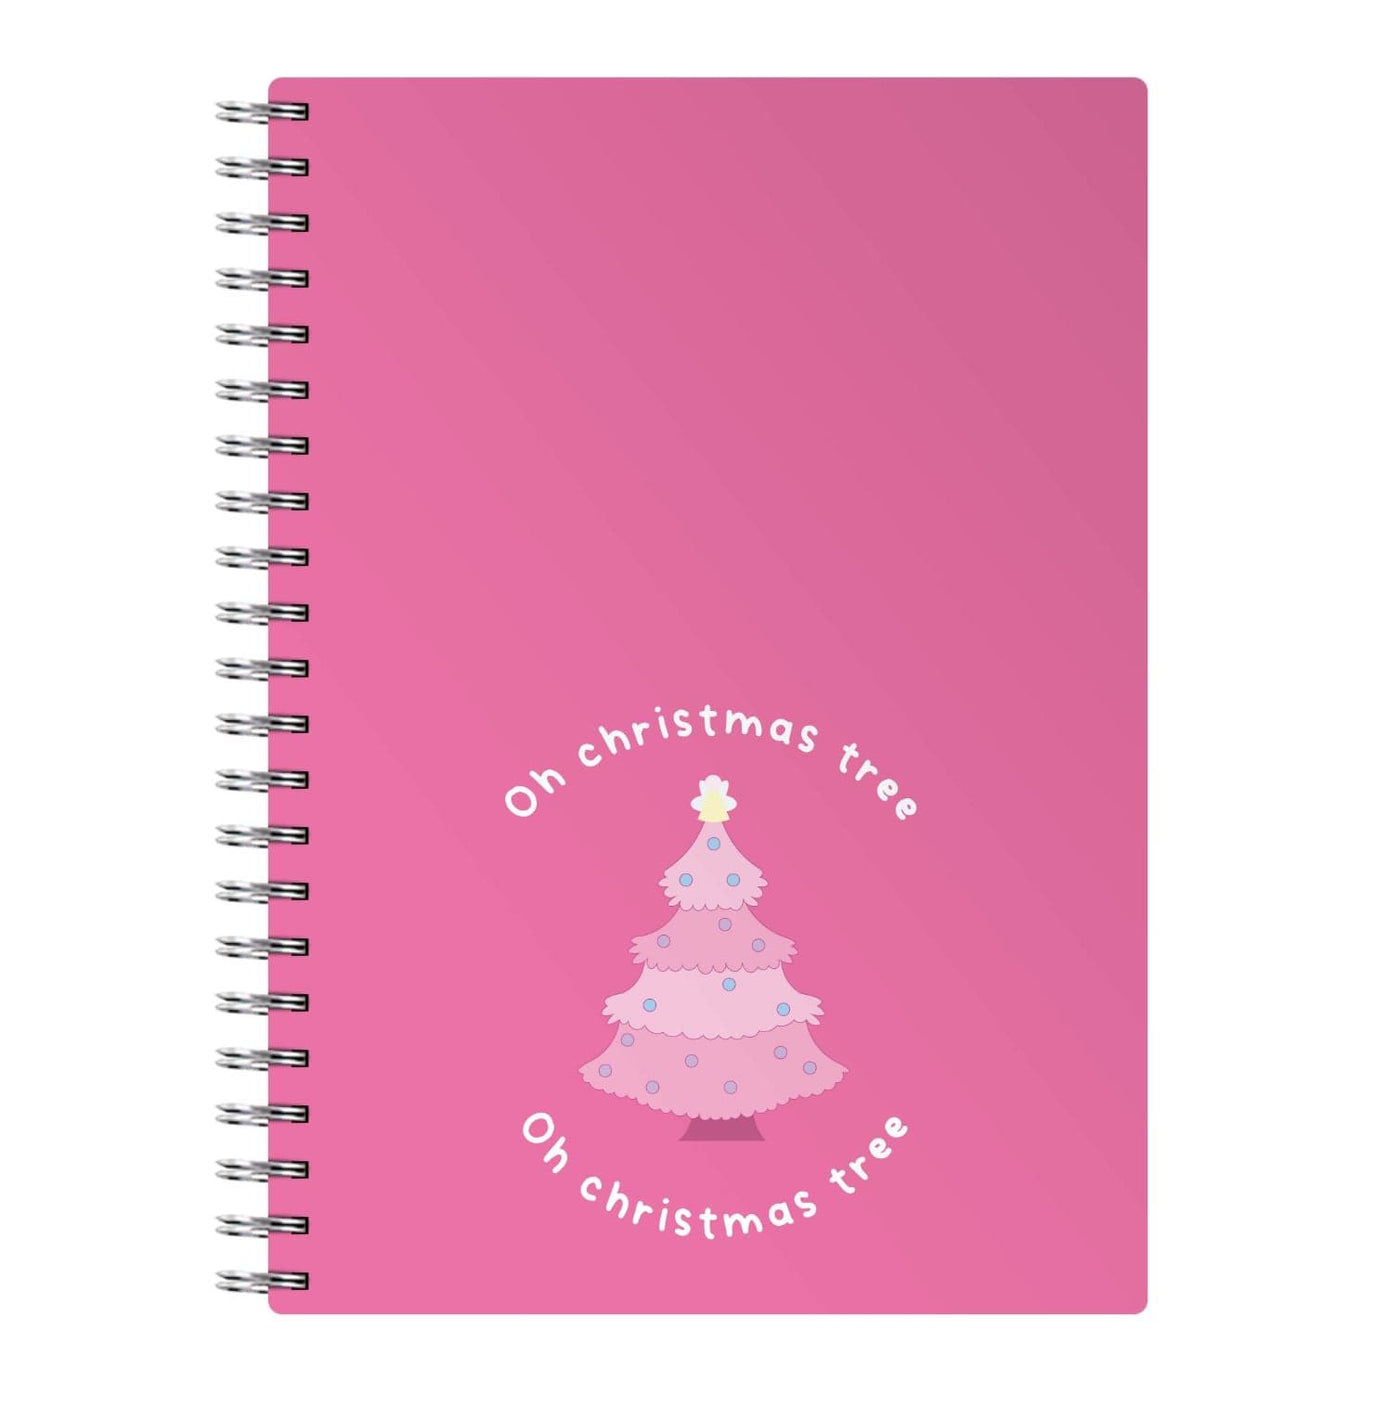 Oh Christmas Tree - Christmas Songs Notebook